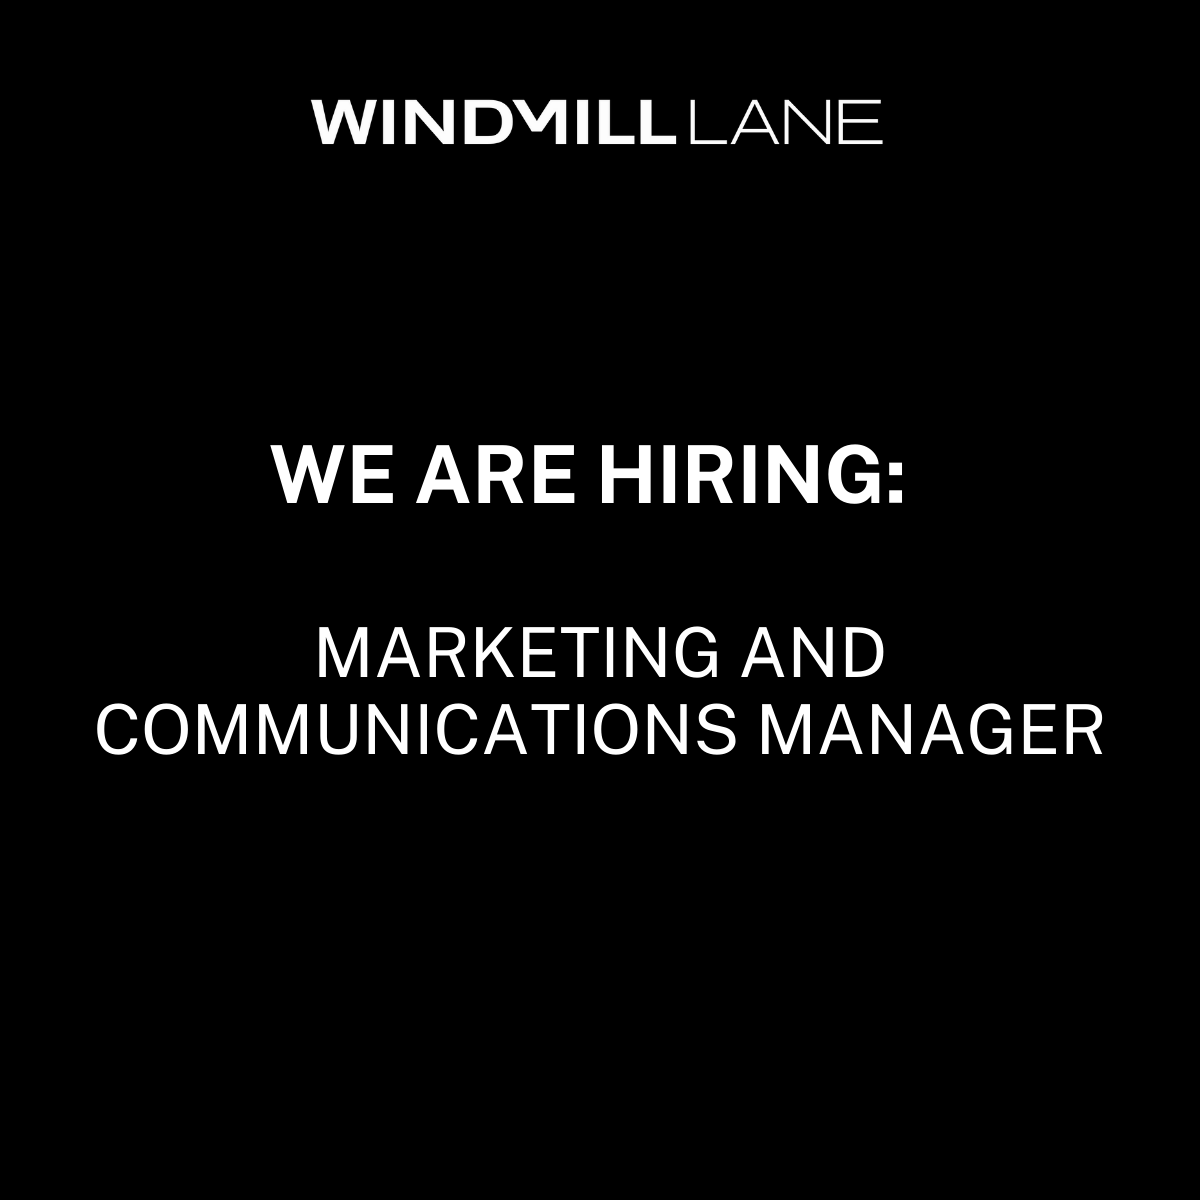 We are looking for a Marketing and Communications Manager! To see the full job description and to apply, please click on the following link: lnkd.in/e5SZKRqU Please send any questions to: recruit@windmilllane.com with ‘Marketing Manager’ in the subject line.